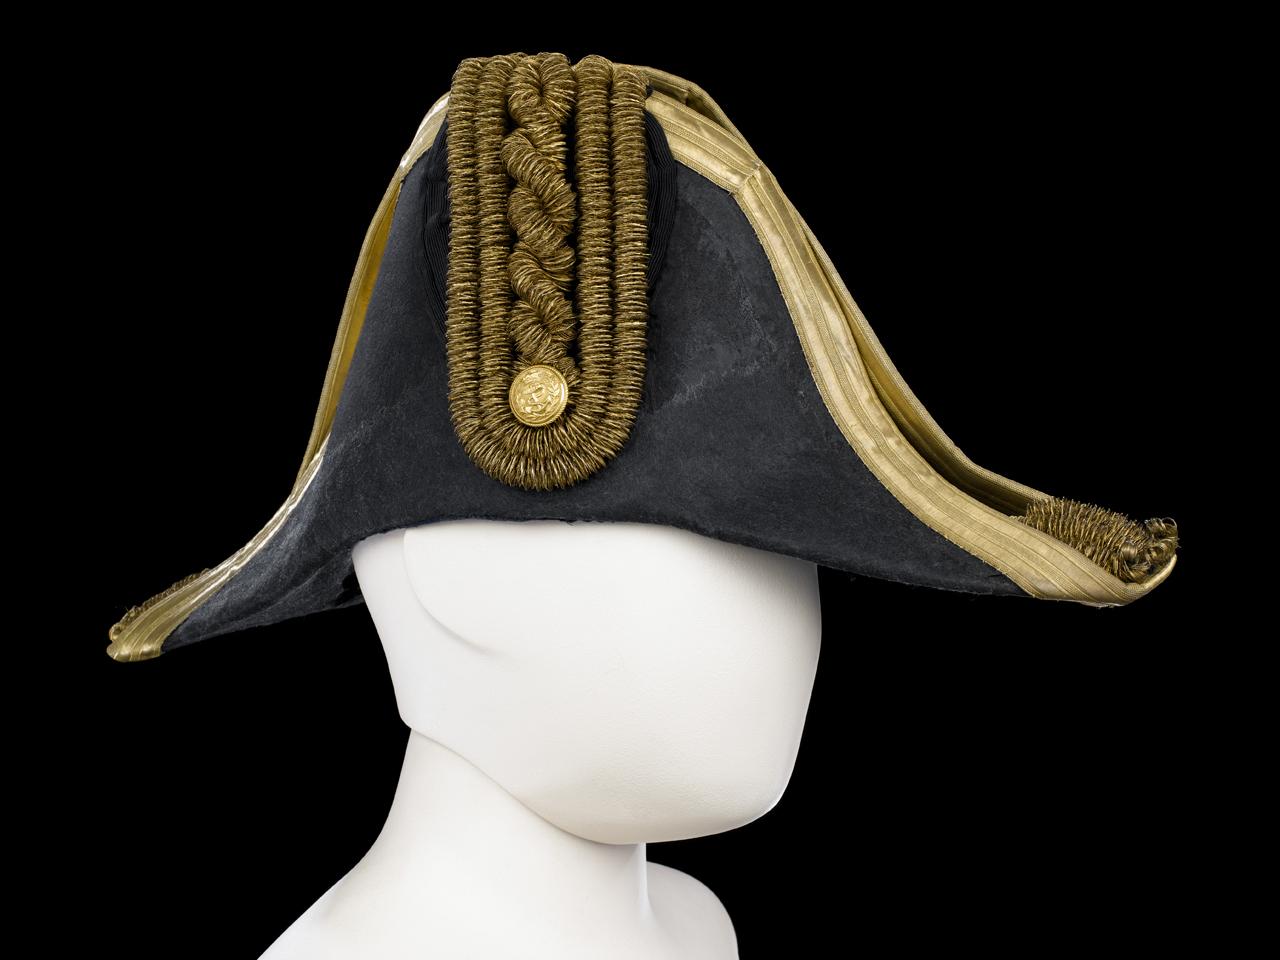 A cocked hat, part of an Admiral's uniform